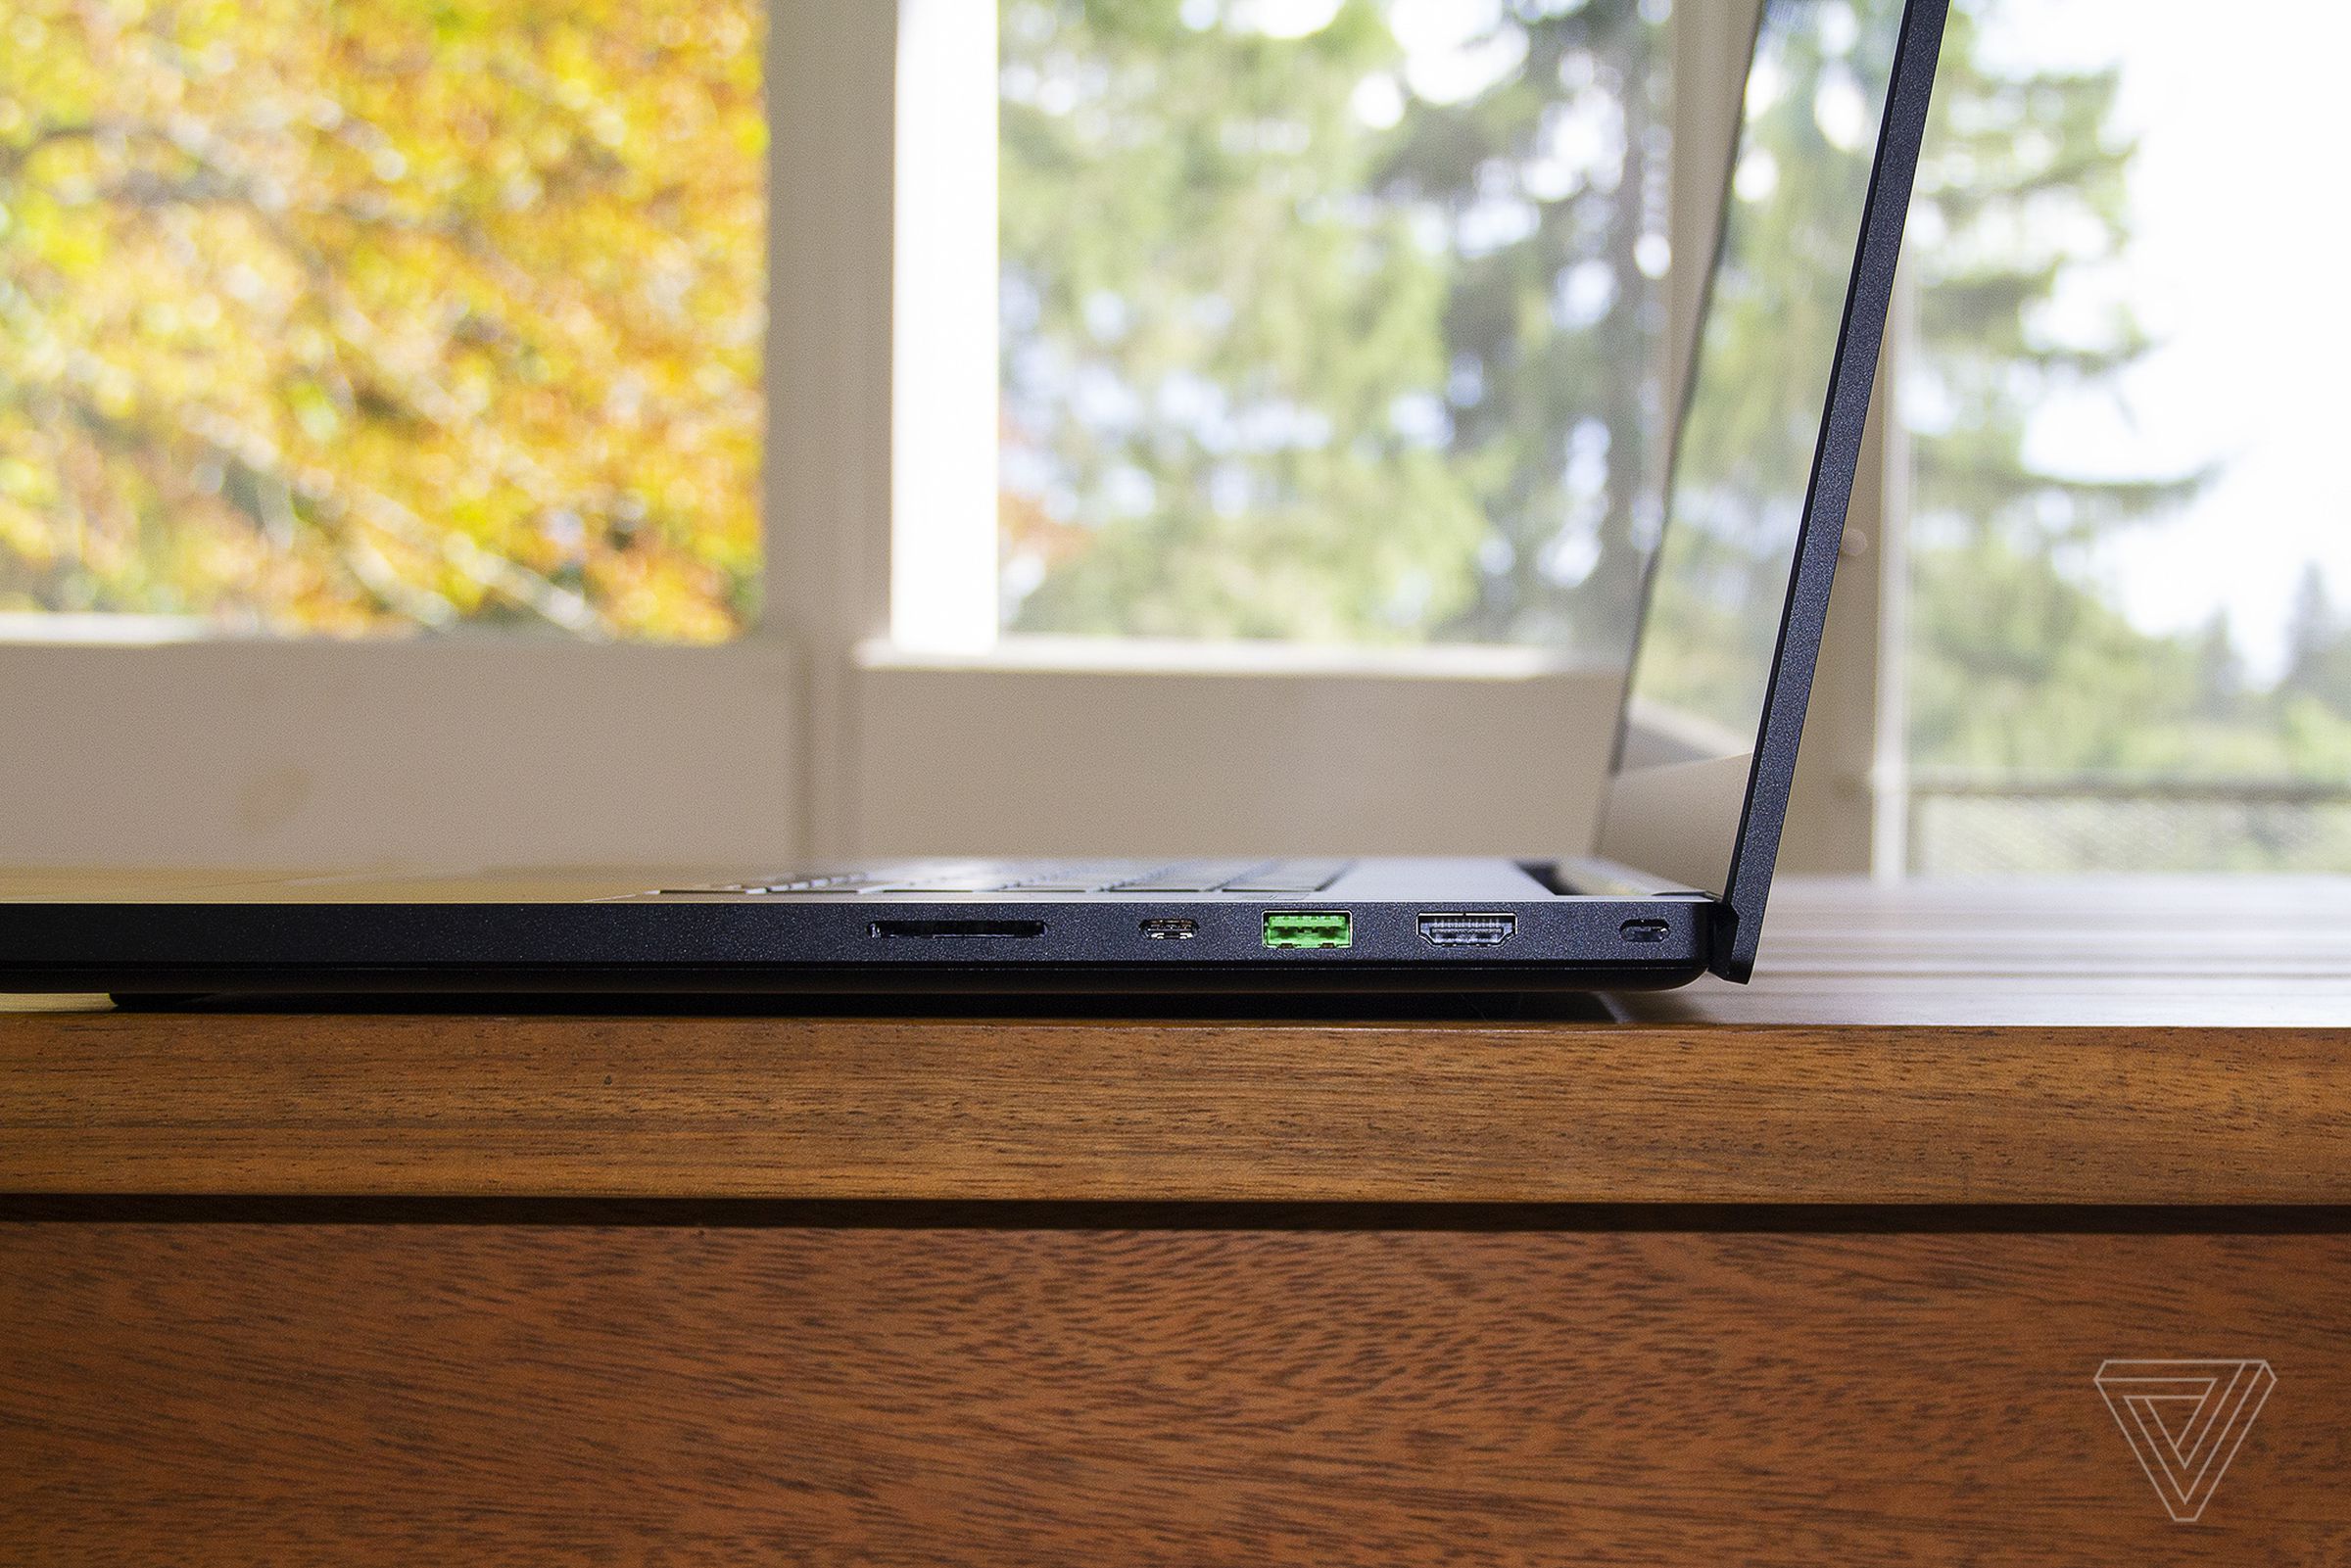 The Razer Blade Pro 17 from the right side.